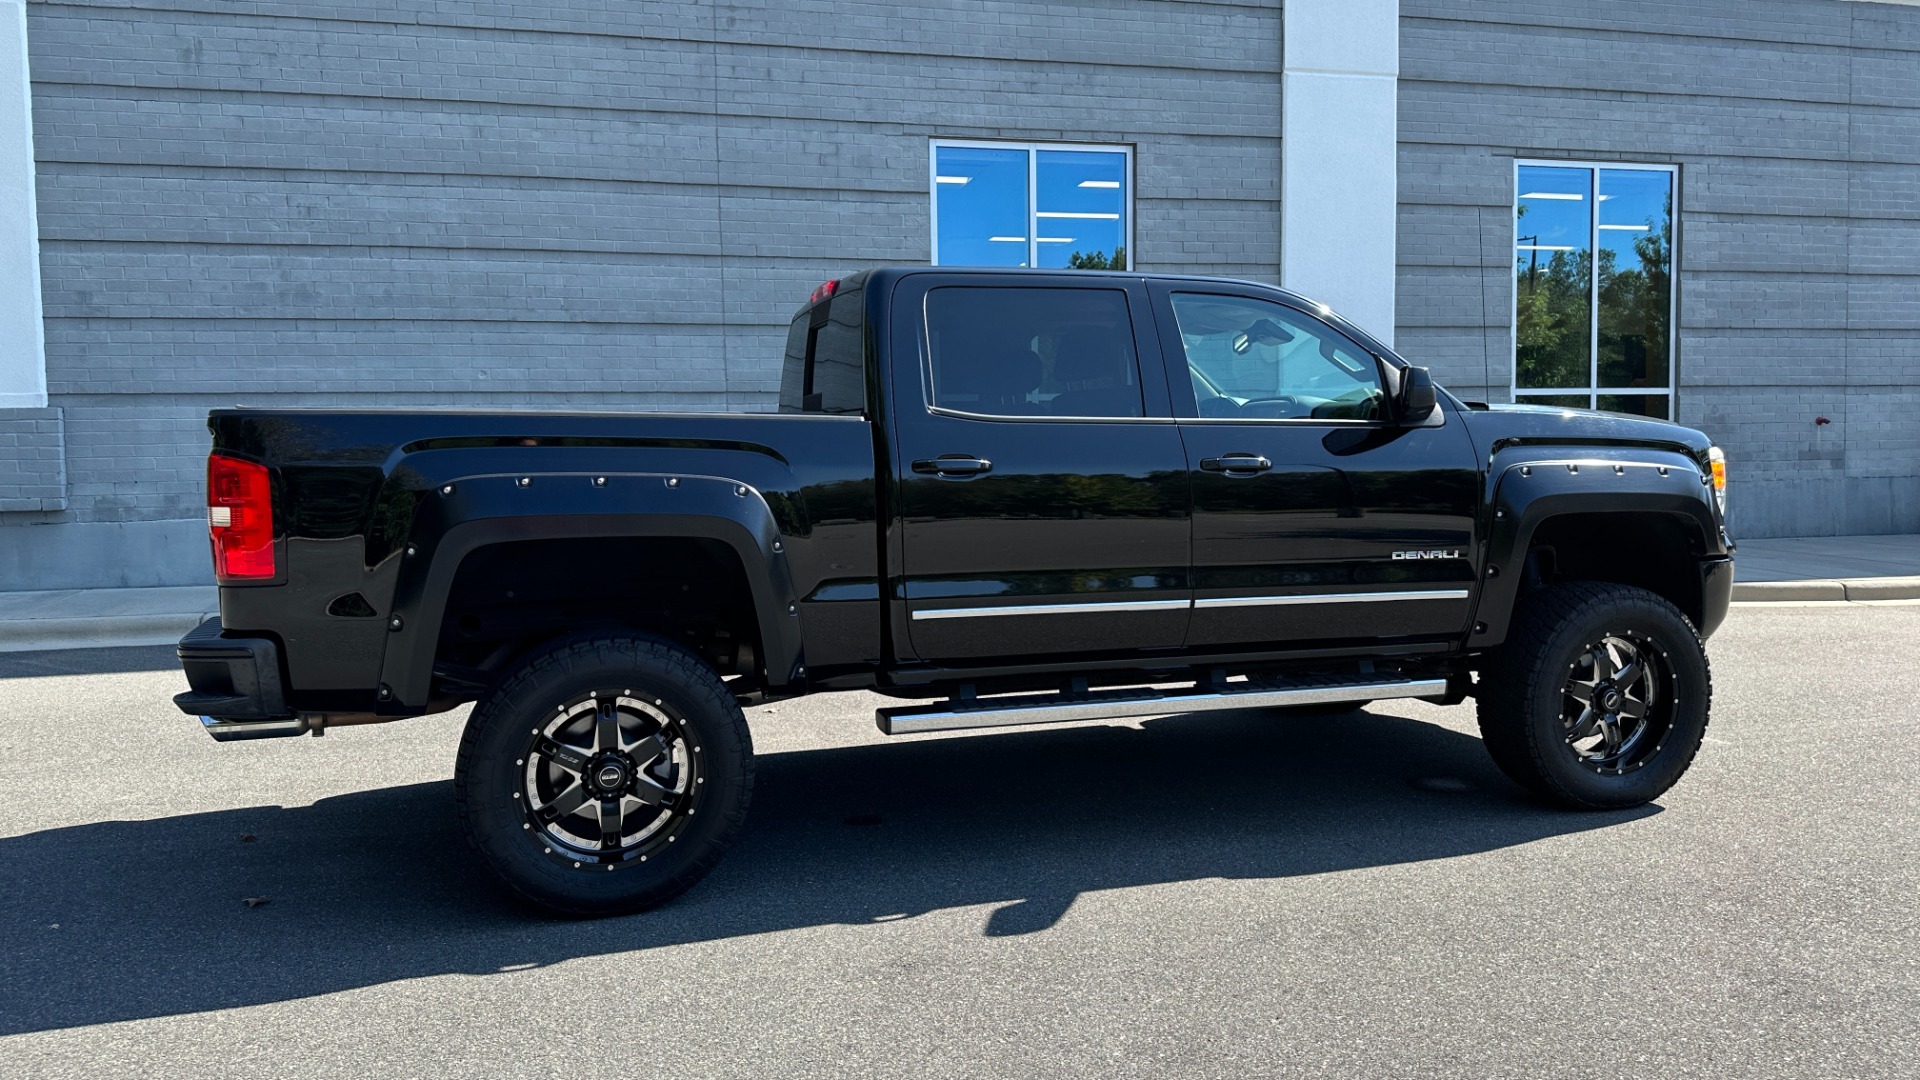 Used 2015 GMC Sierra 1500 DENALI / LIFT KIT / UPGRADED WHEELS / SUNROOF / 6.2L V8 for sale $33,995 at Formula Imports in Charlotte NC 28227 6